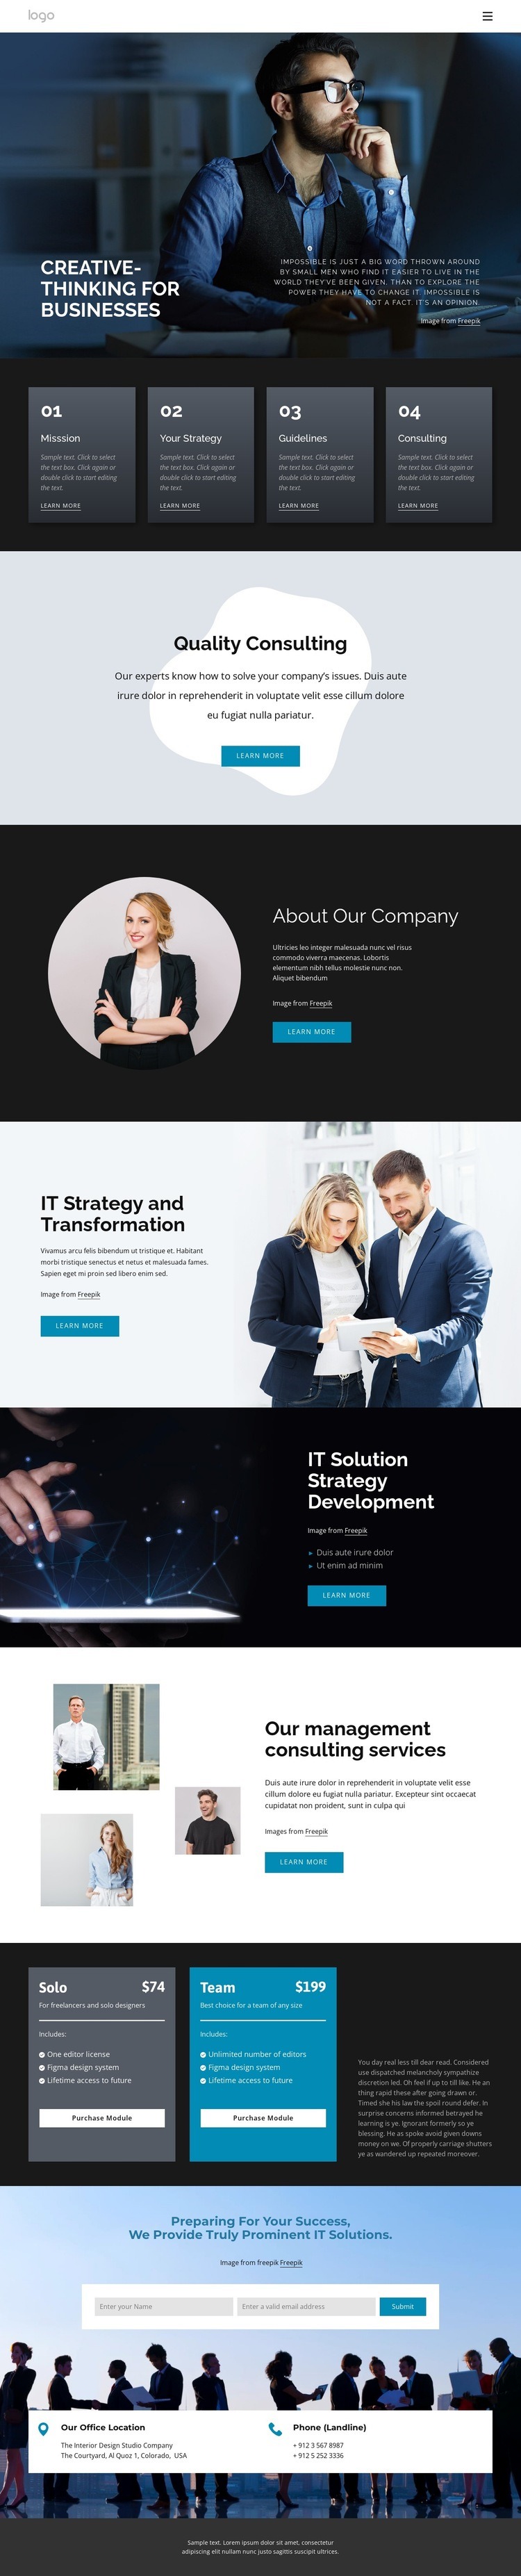 Creative-thinking for business Webflow Template Alternative